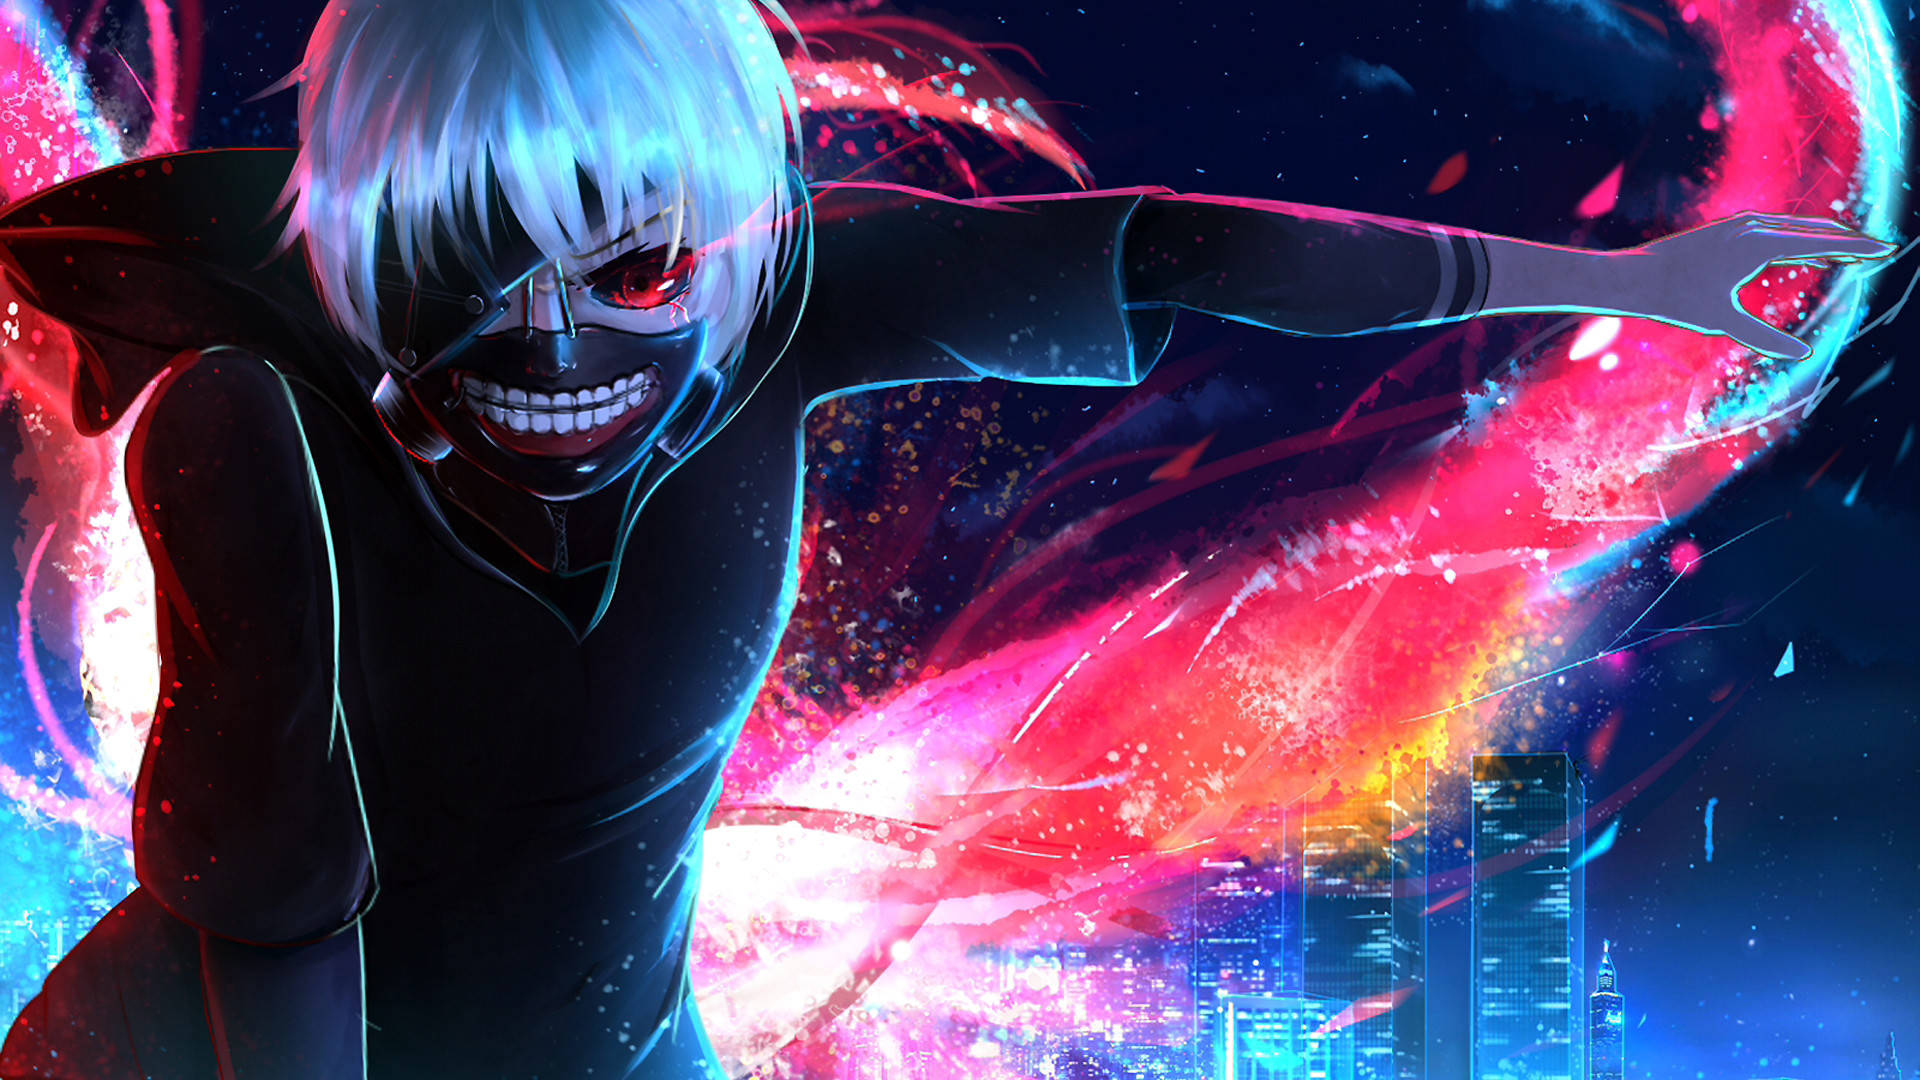 Colorful Tokyo Ghoul Poster Hd